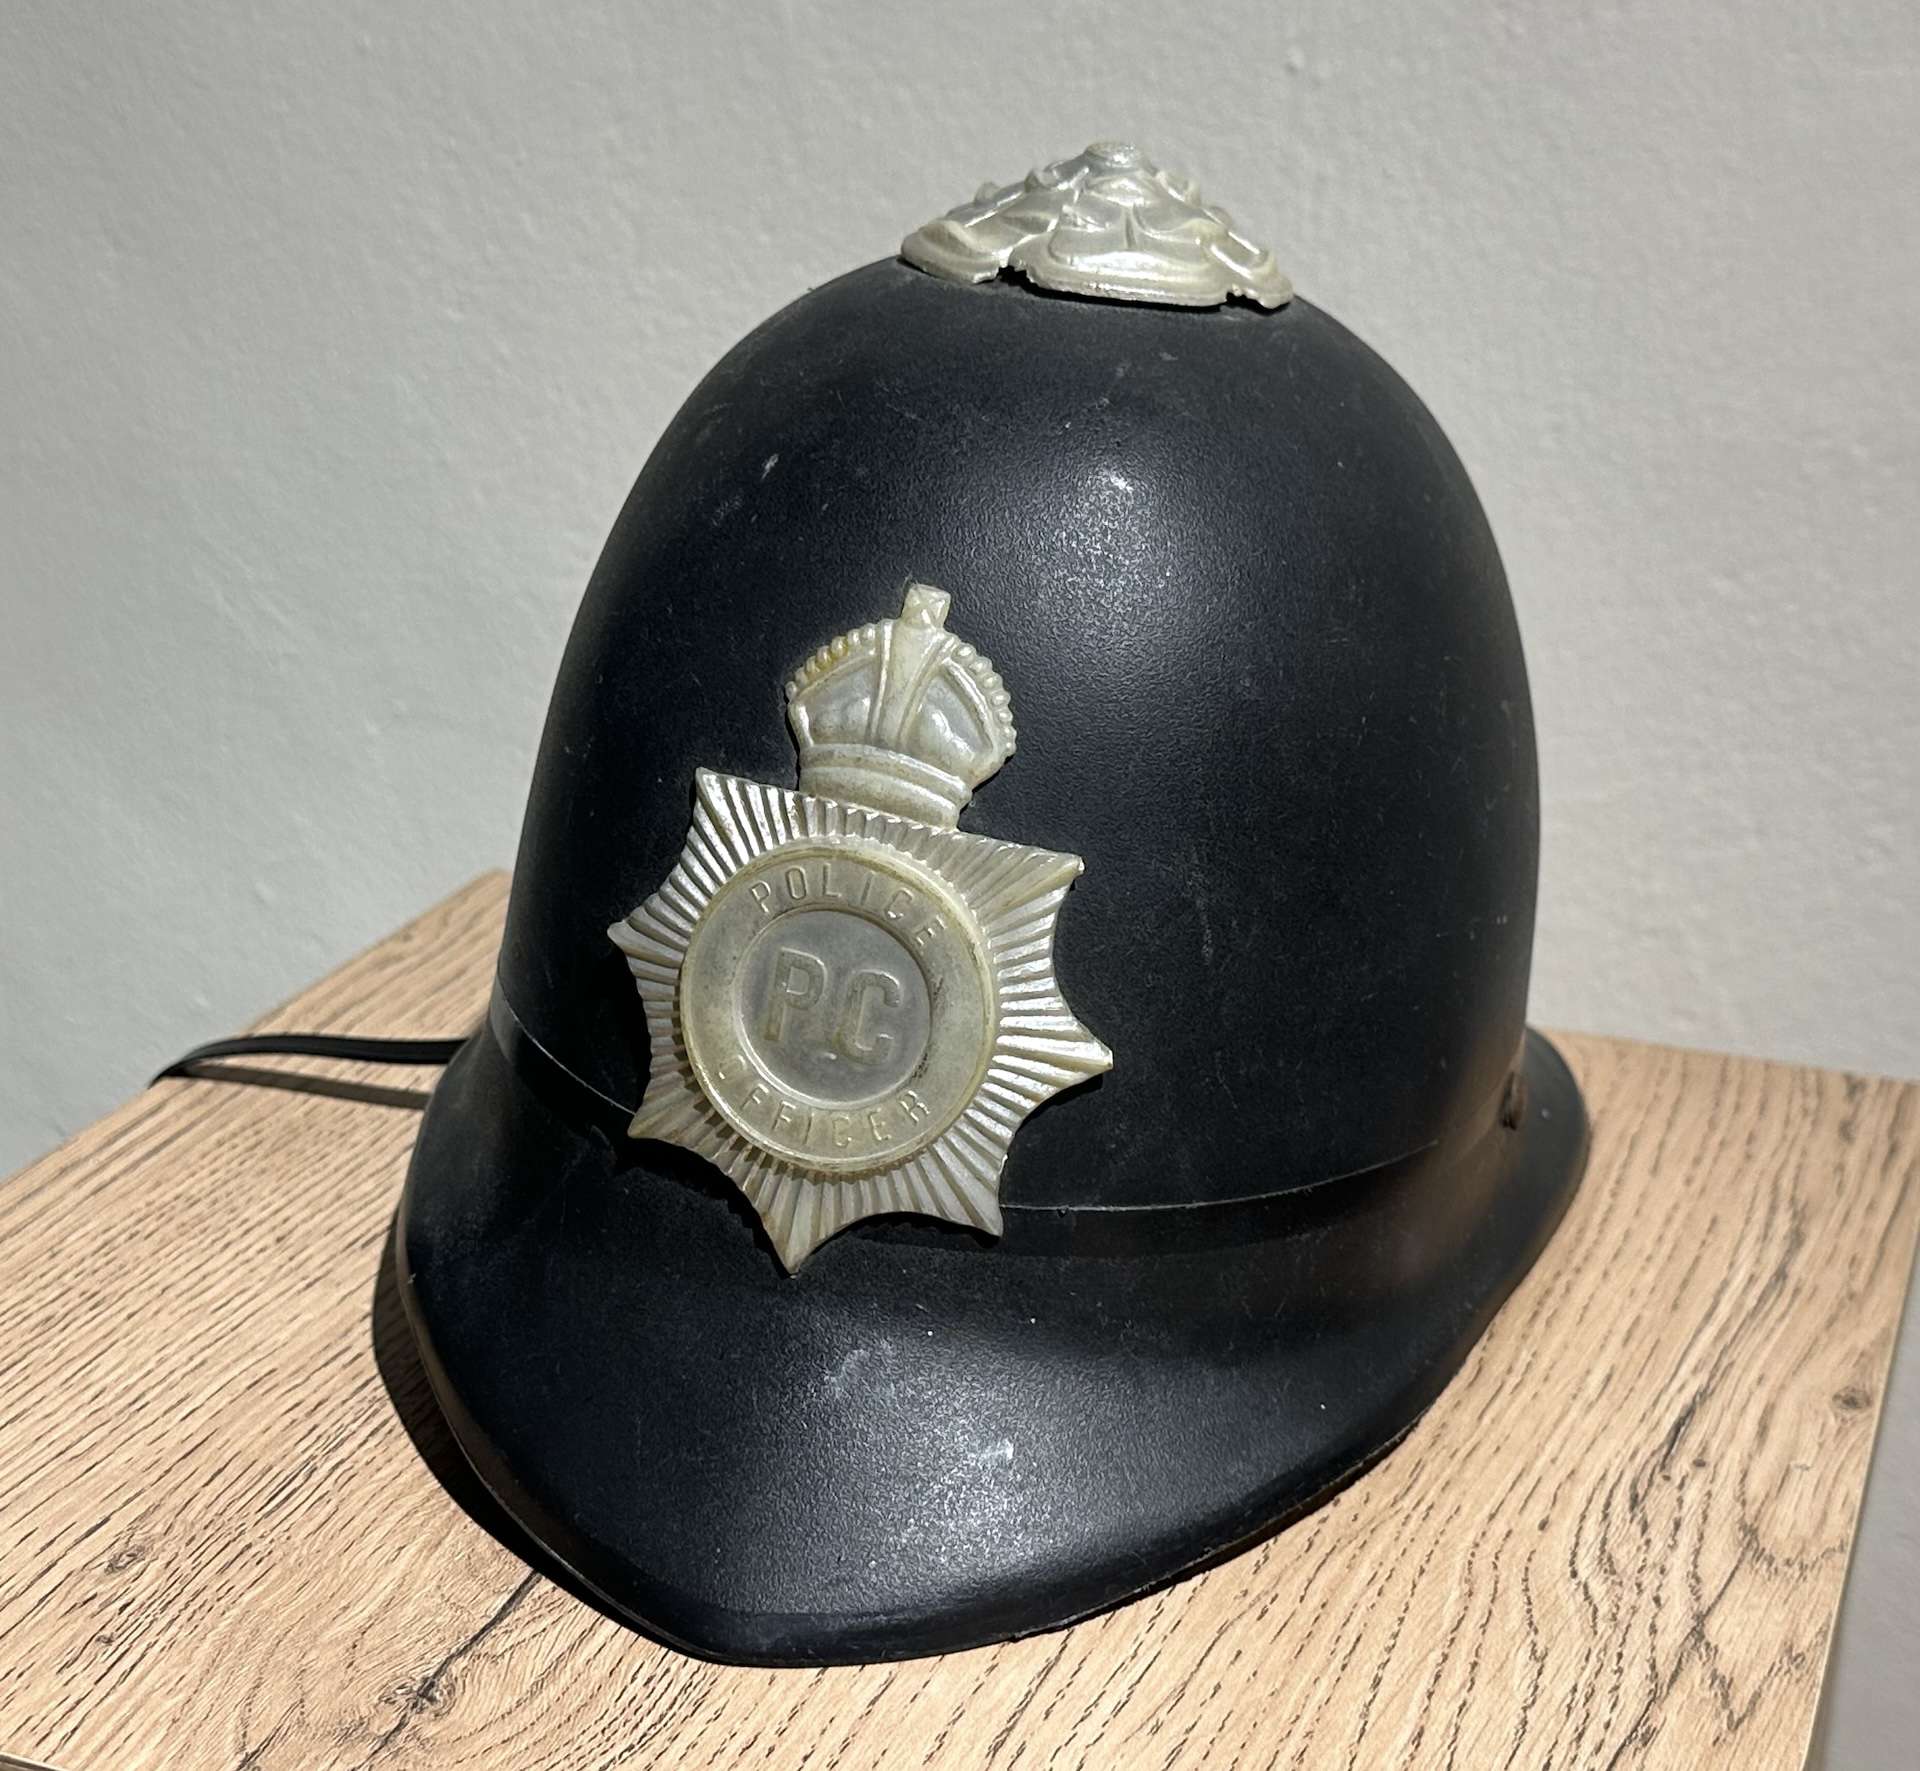 Police officer's hat at the National Museum of Hats at the Francisco Giraldo Cultural Center in Aguadas, Caldas, Colombia